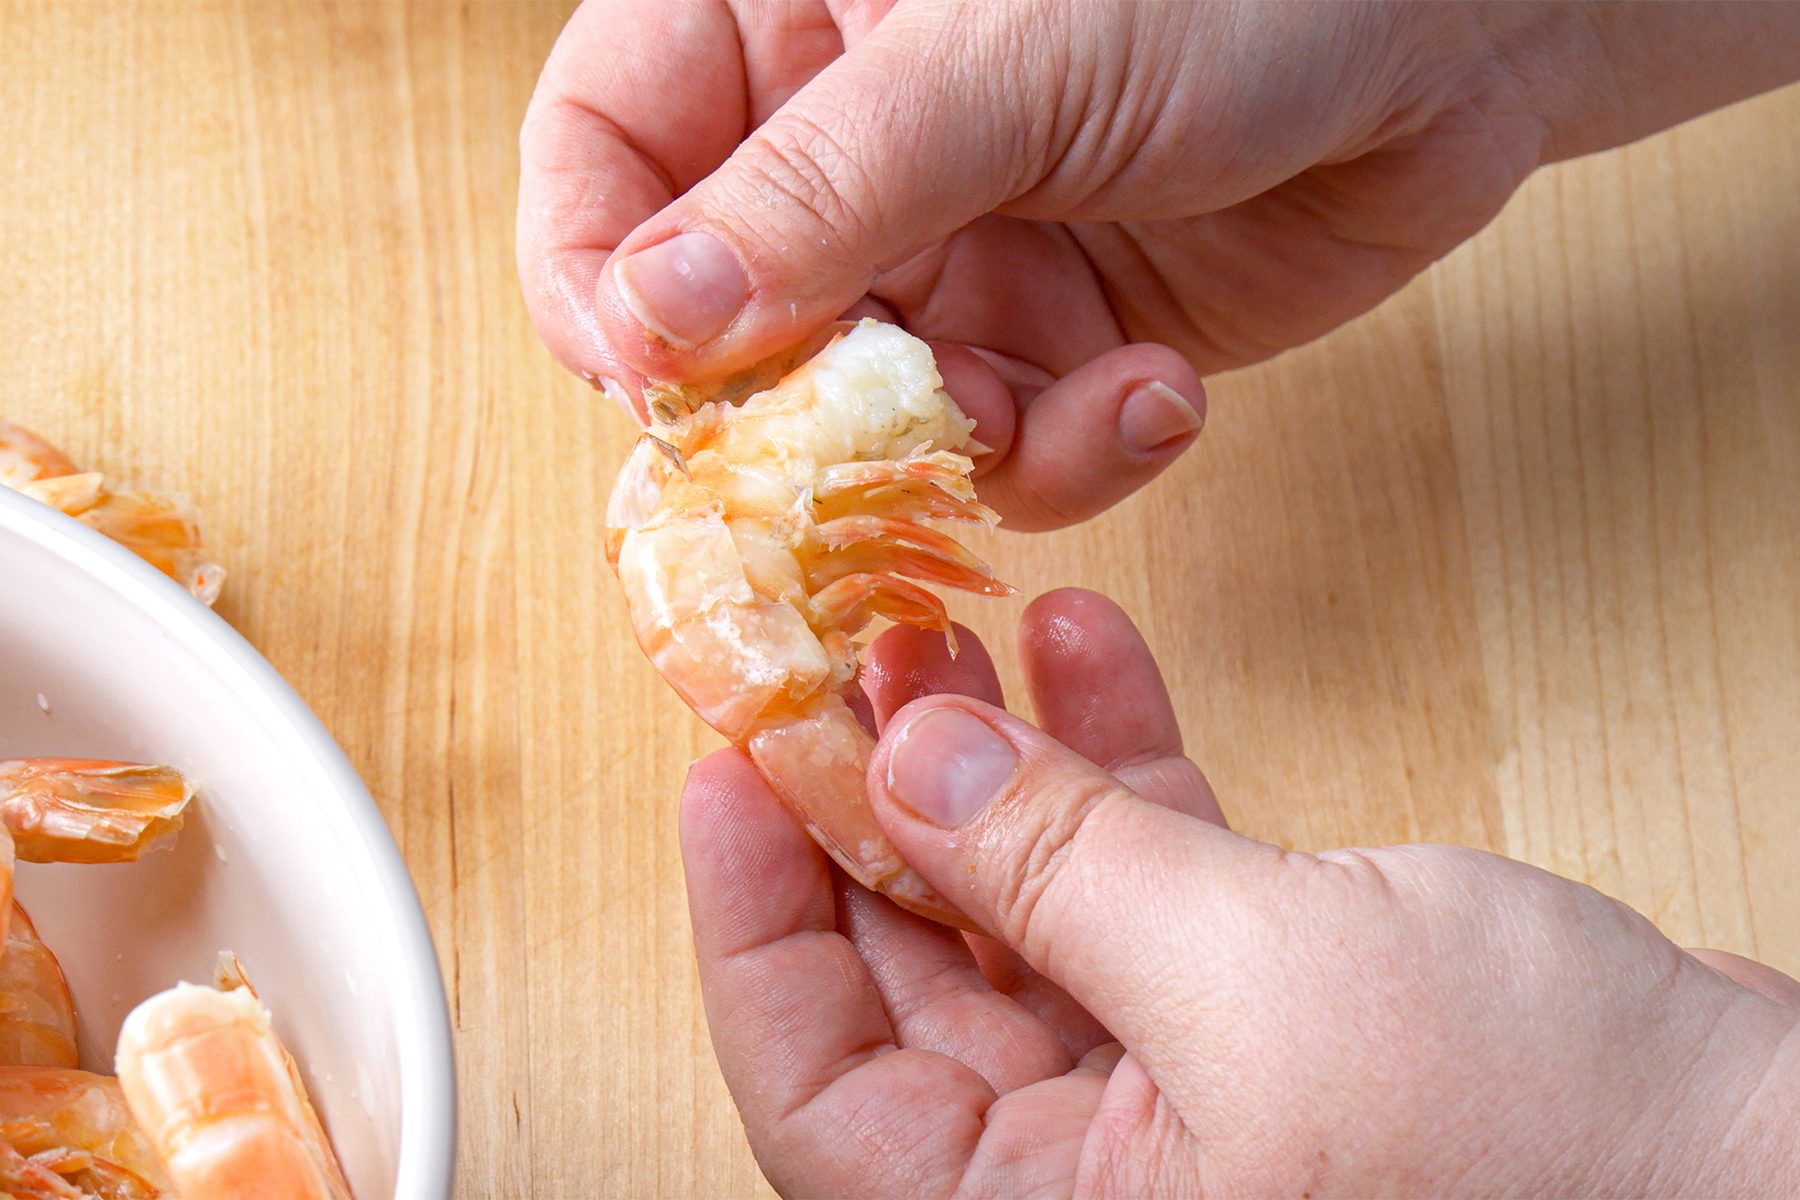 Peeling shrimps with hands